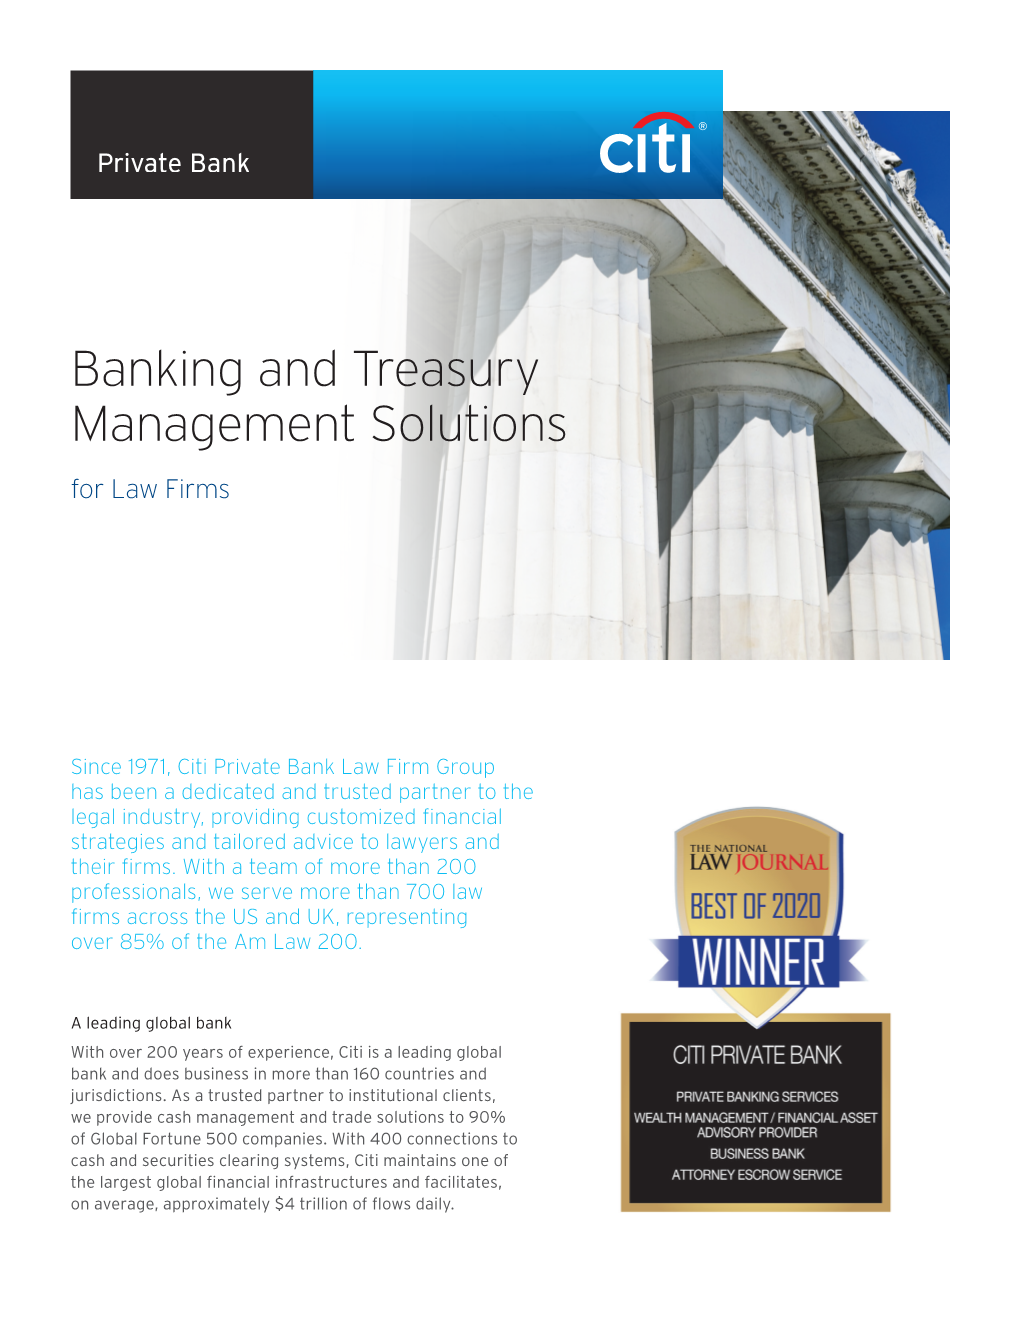 Banking and Treasury Management Solutions for Law Firms